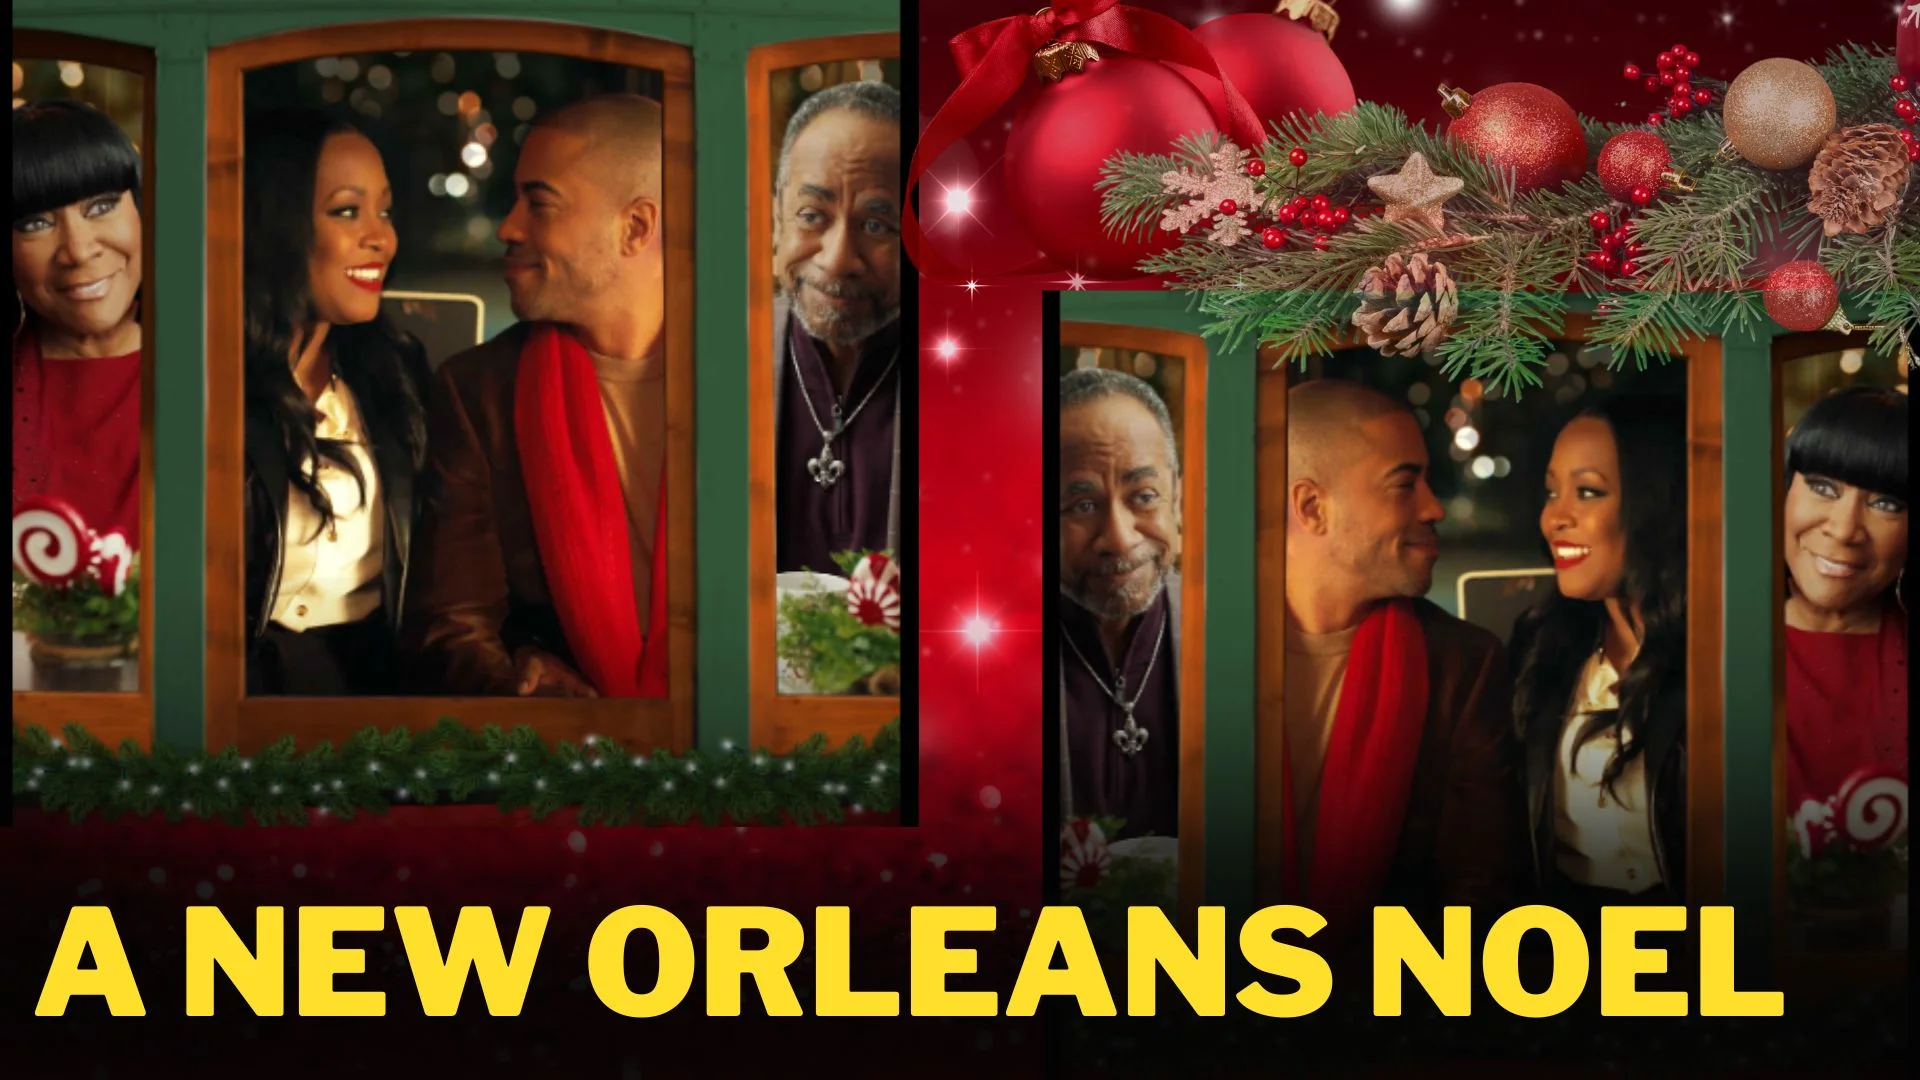 A New Orleans Noel Parents Guide and Age Rating 2022